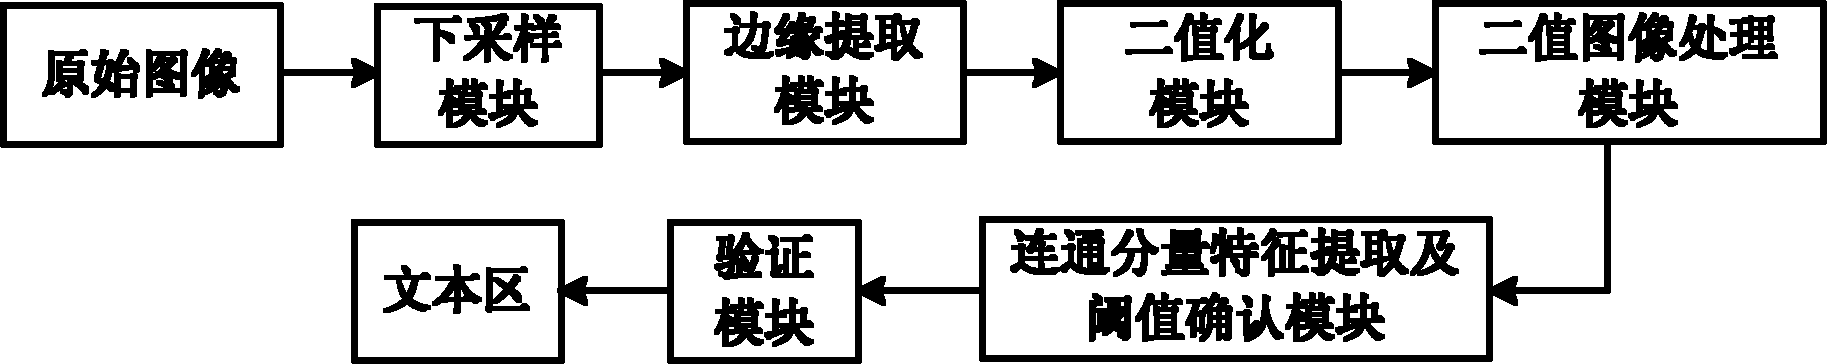 Chinese environment-oriented complex scene text positioning method